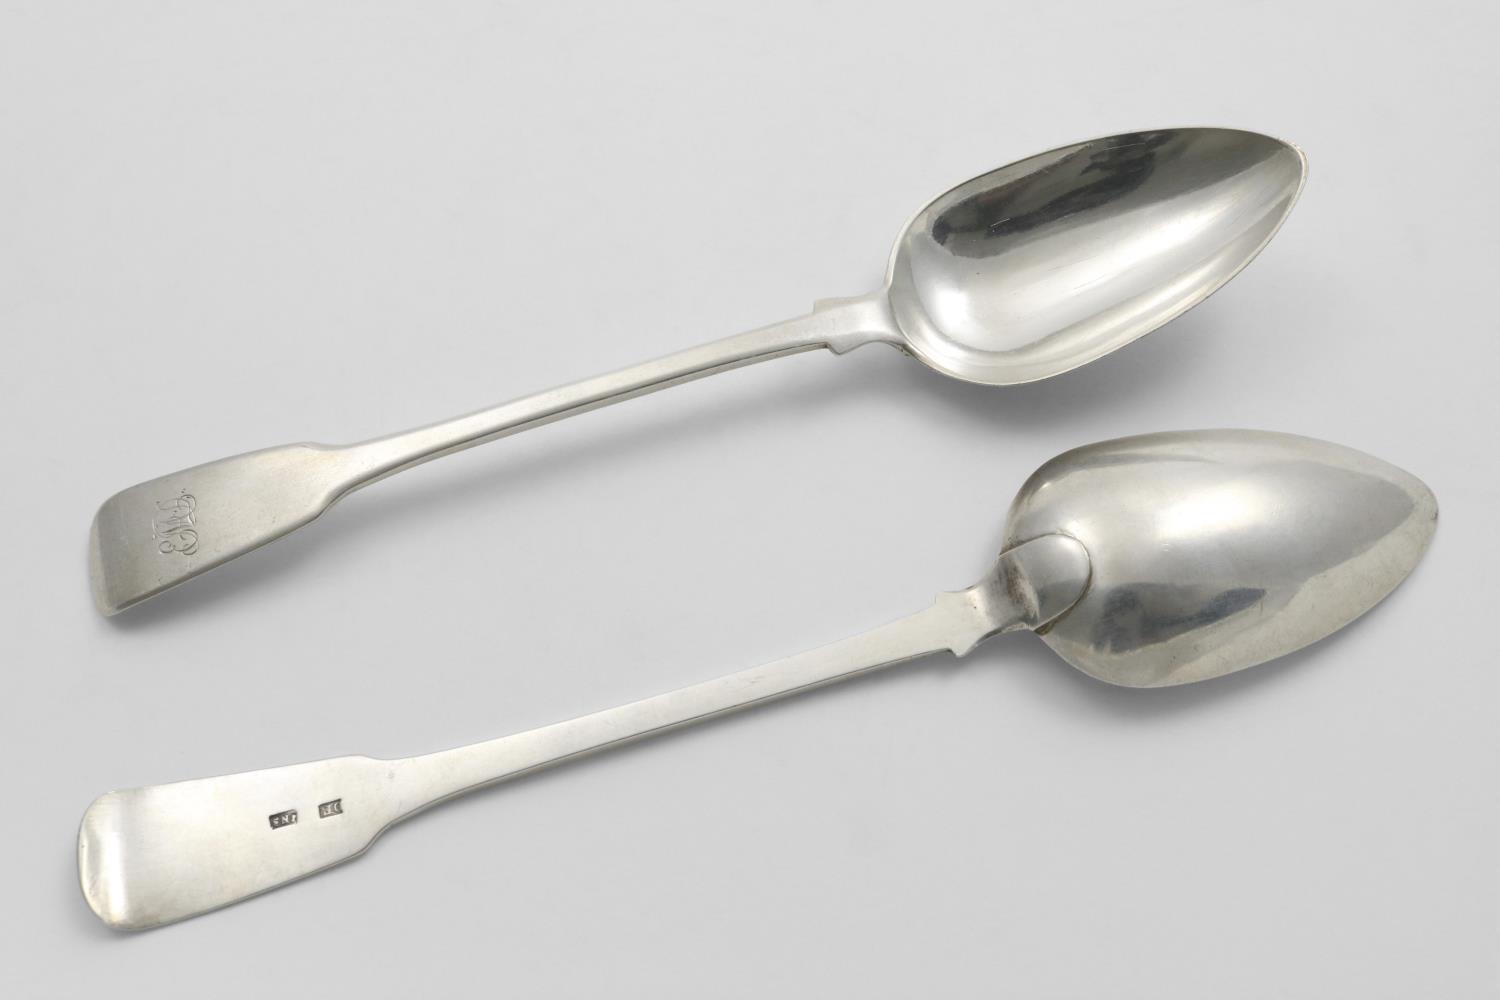 TWO VERY SIMILAR GEORGE III SCOTTISH PROVINCIAL FIDDLE PATTERN TABLE SPOONS initialled "EMD", by